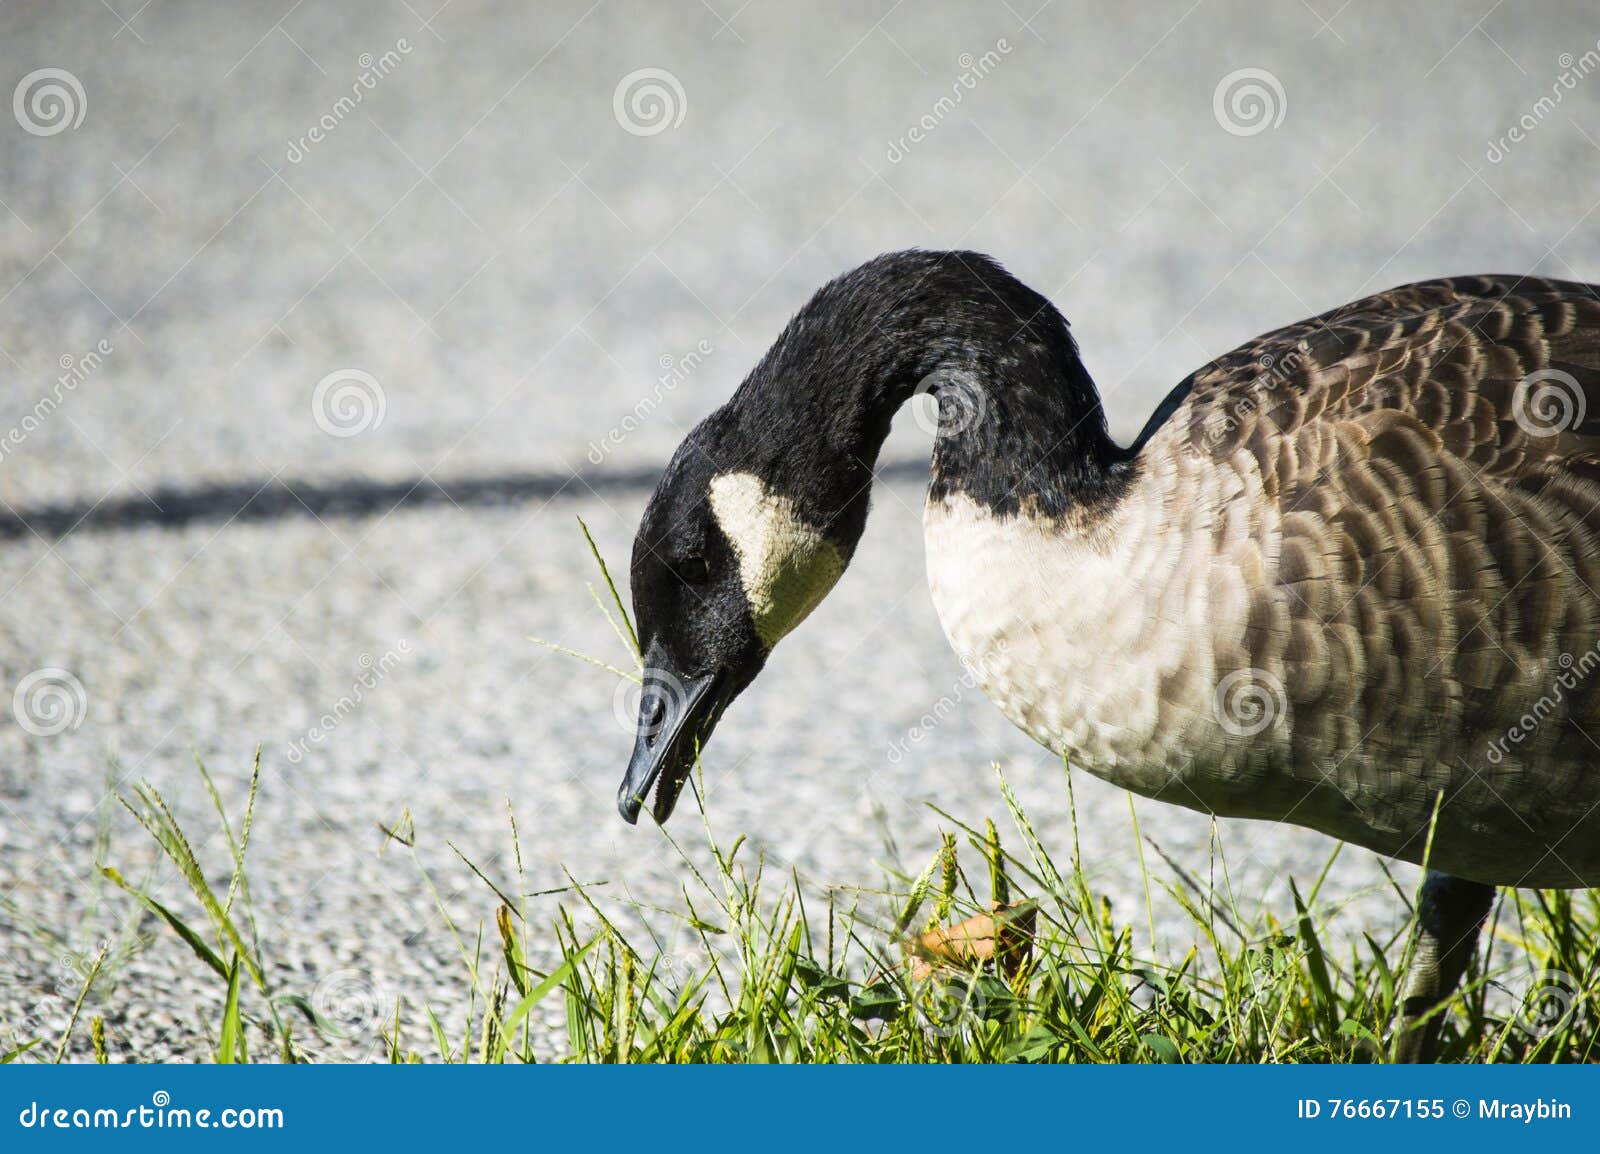 goose with beak open ready to peck at some food